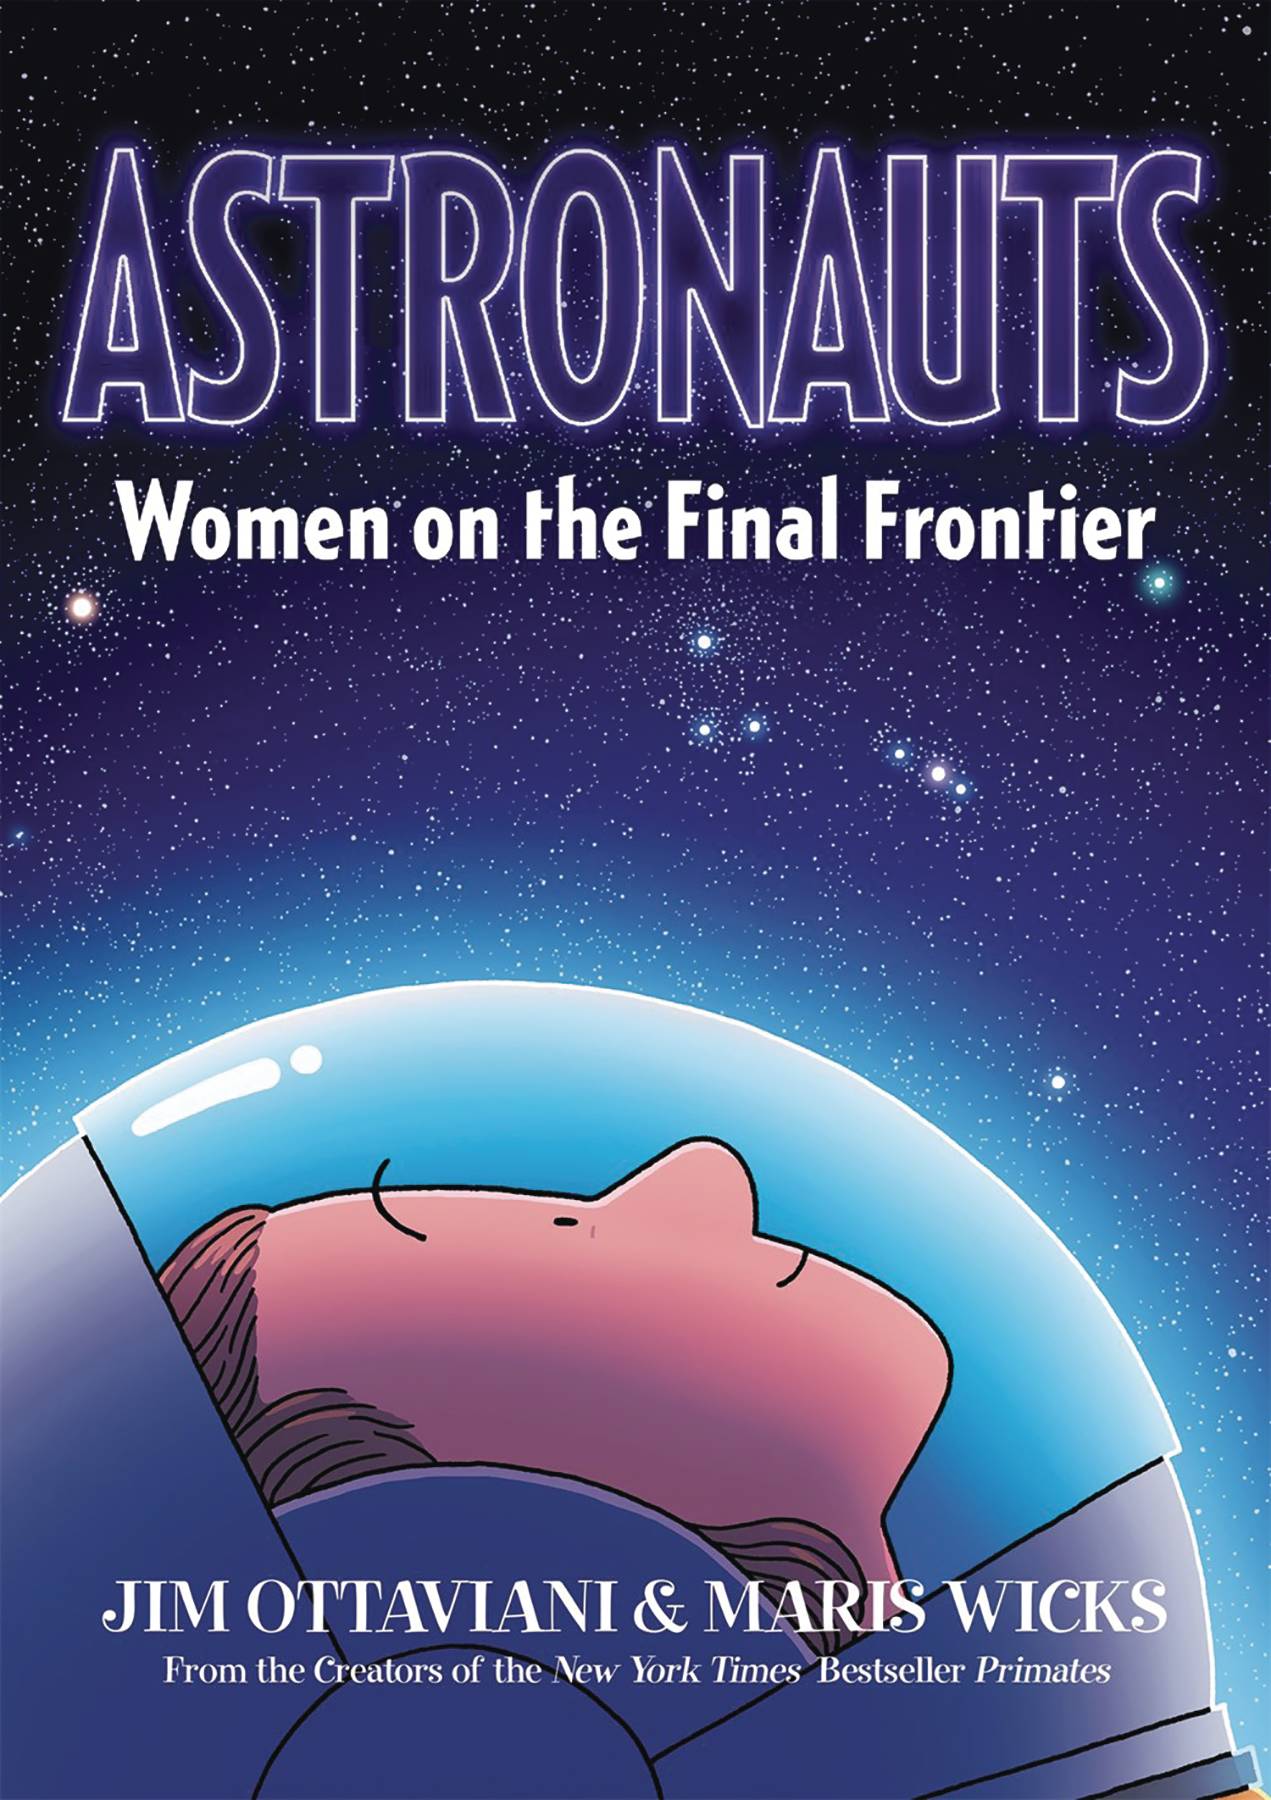 Astronauts Women On Final Frontier Soft Cover Graphic Novel